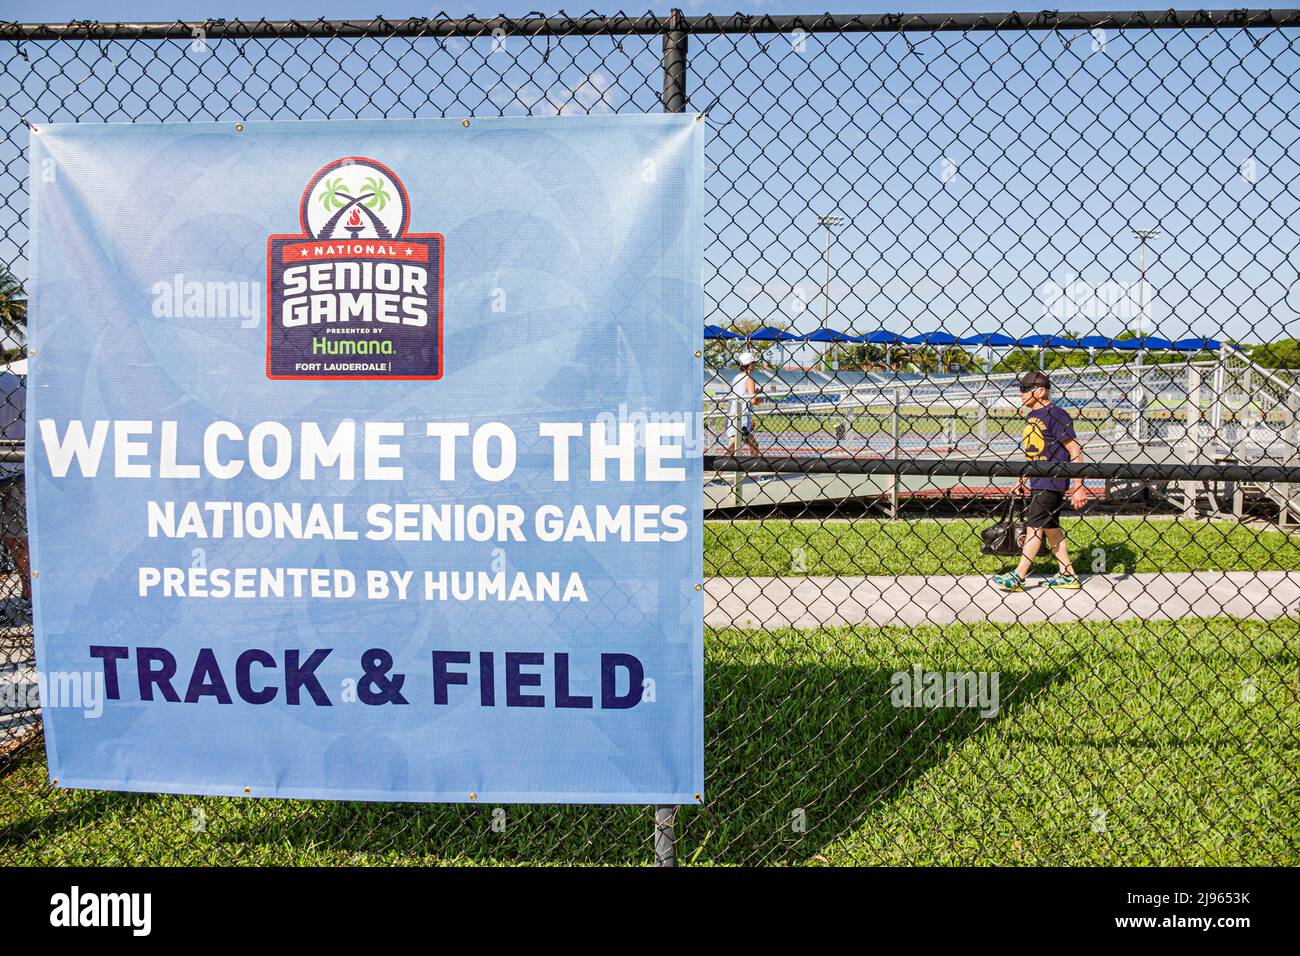 Fort Ft. Lauderdale Florida,Ansin Sports Complex Track & Field National Senior Games Stock Photo